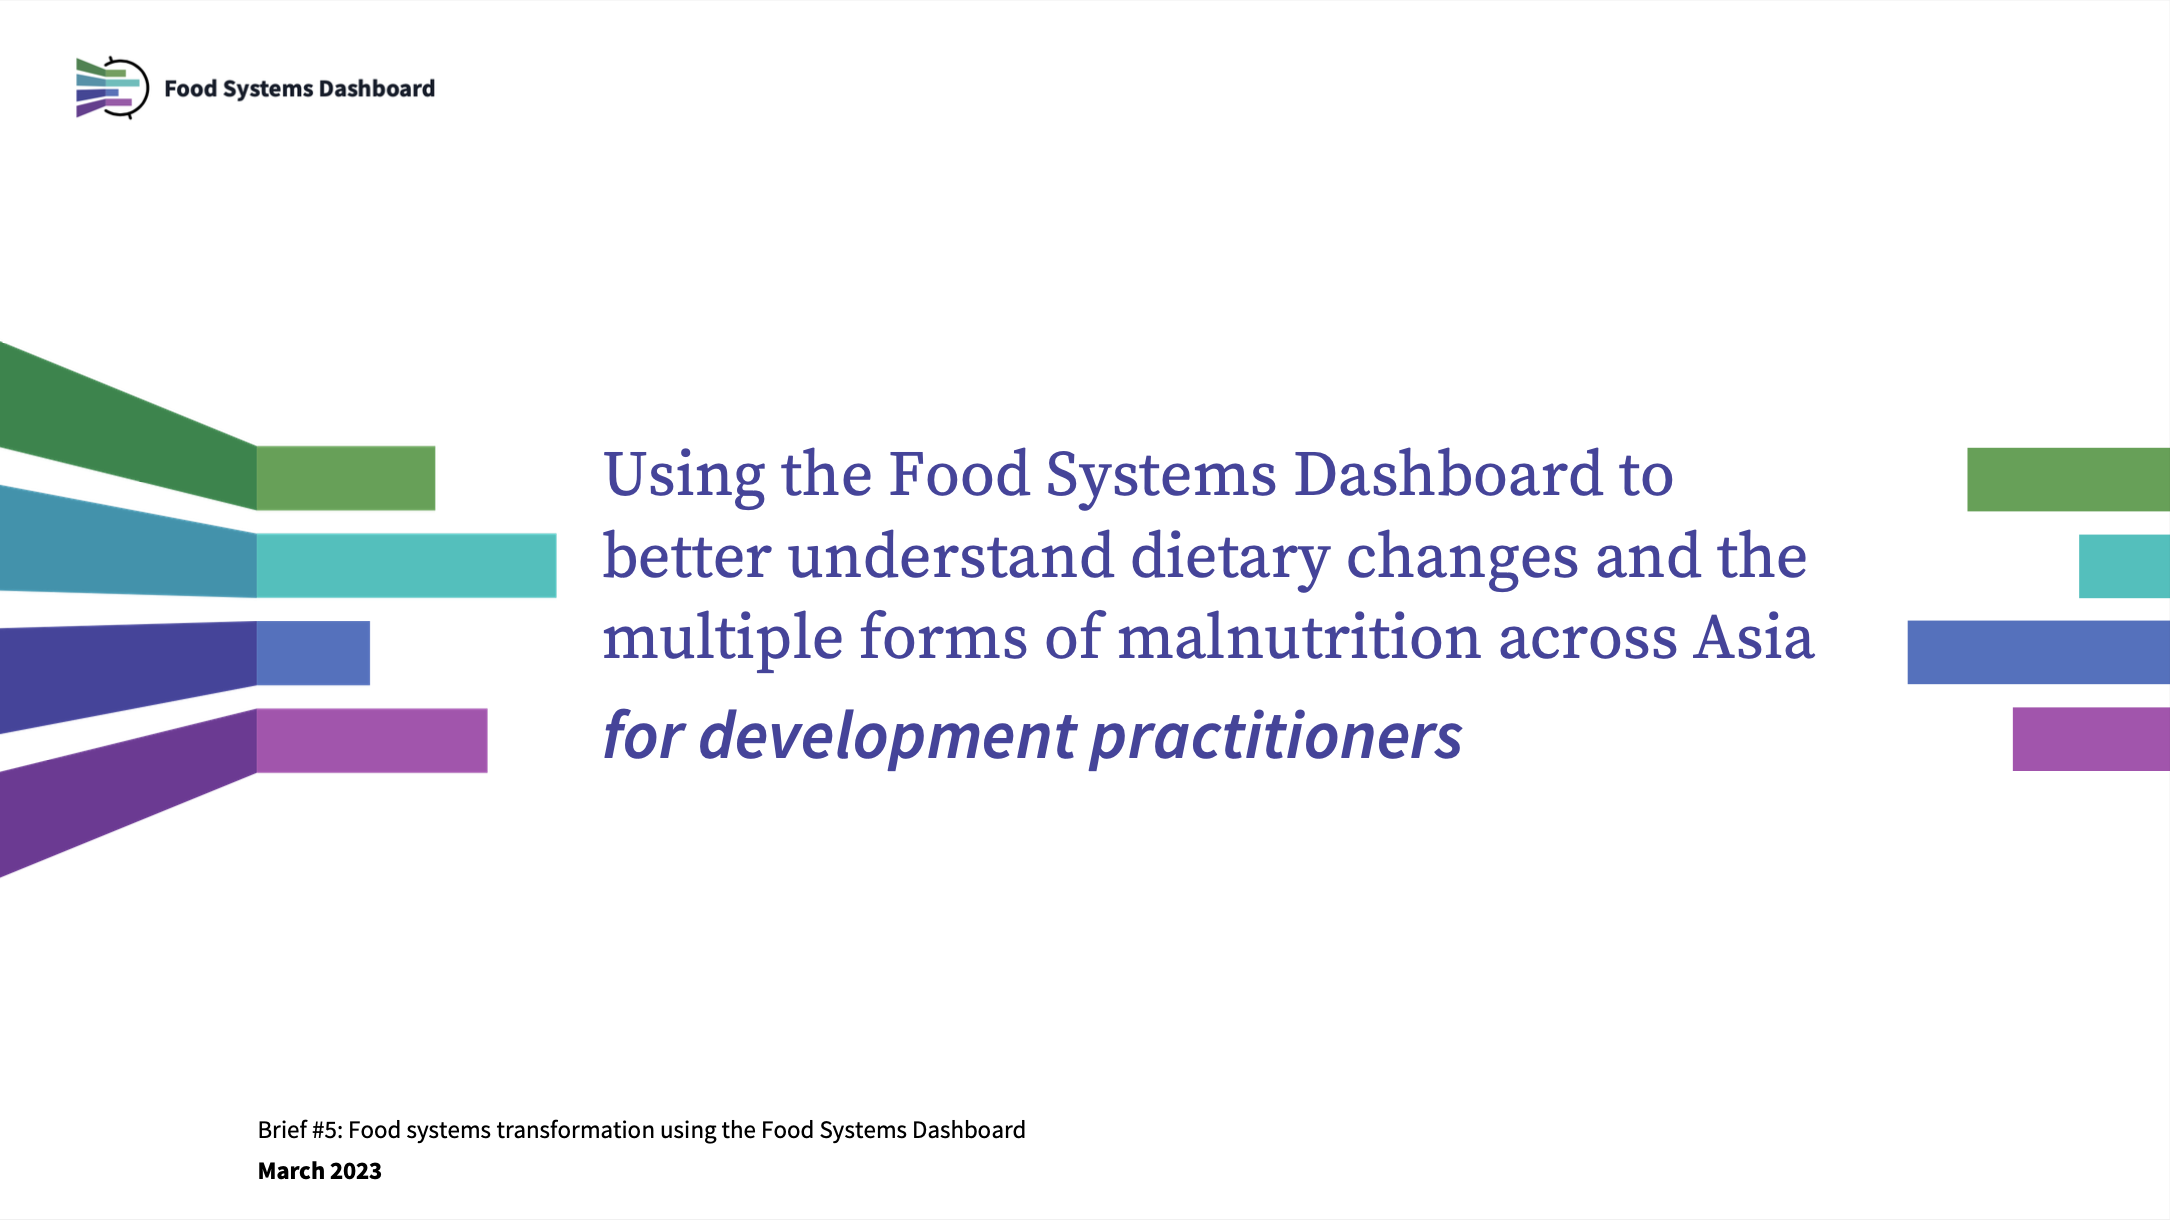 Using the Food Systems Dashboard to better understand dietary changes and the multiple forms of malnutrition across Asia